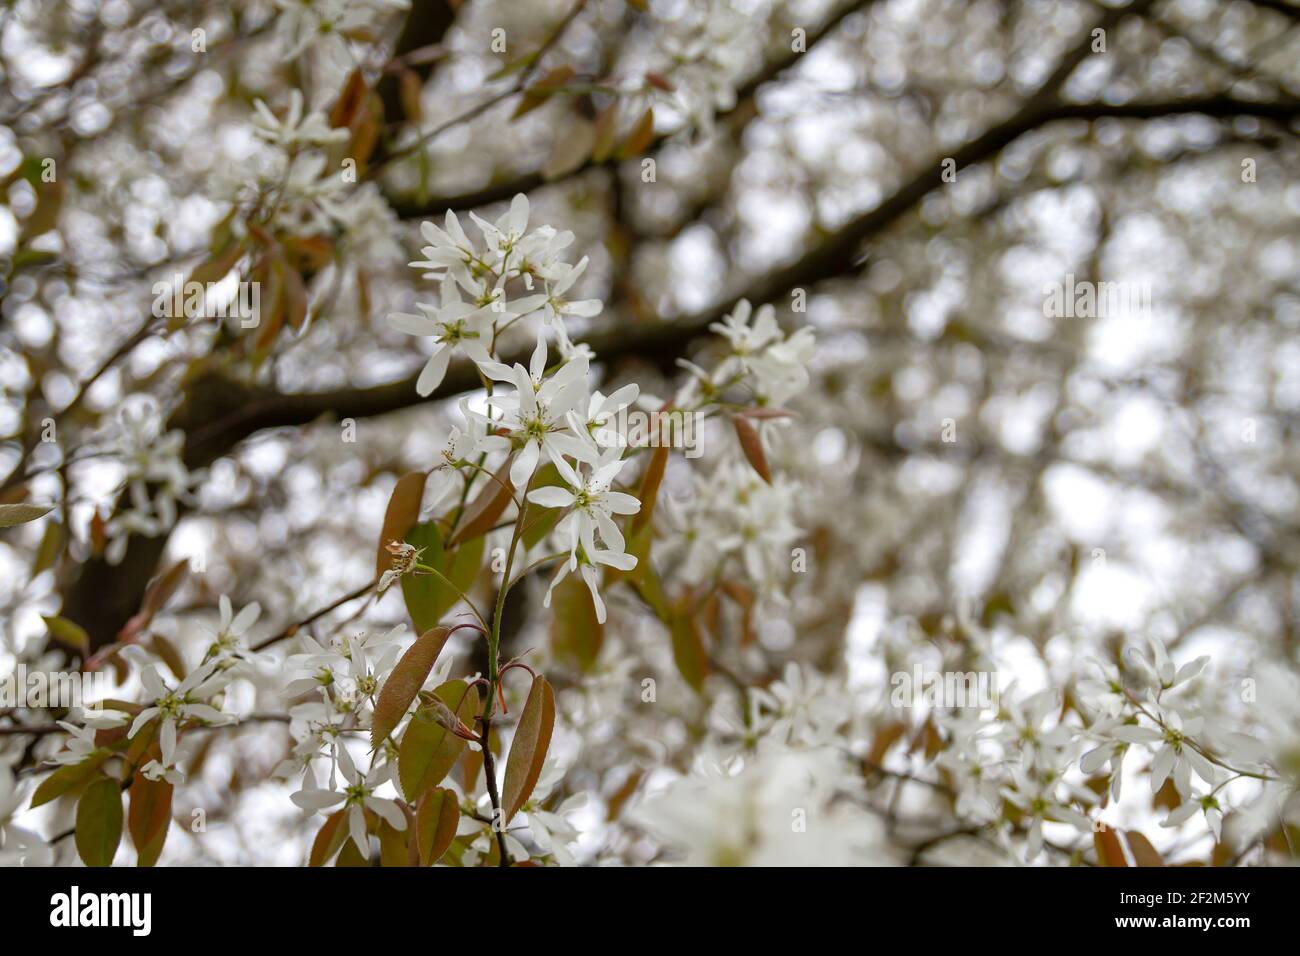 Snowy mespilus white flowers blossoming in spring Stock Photo